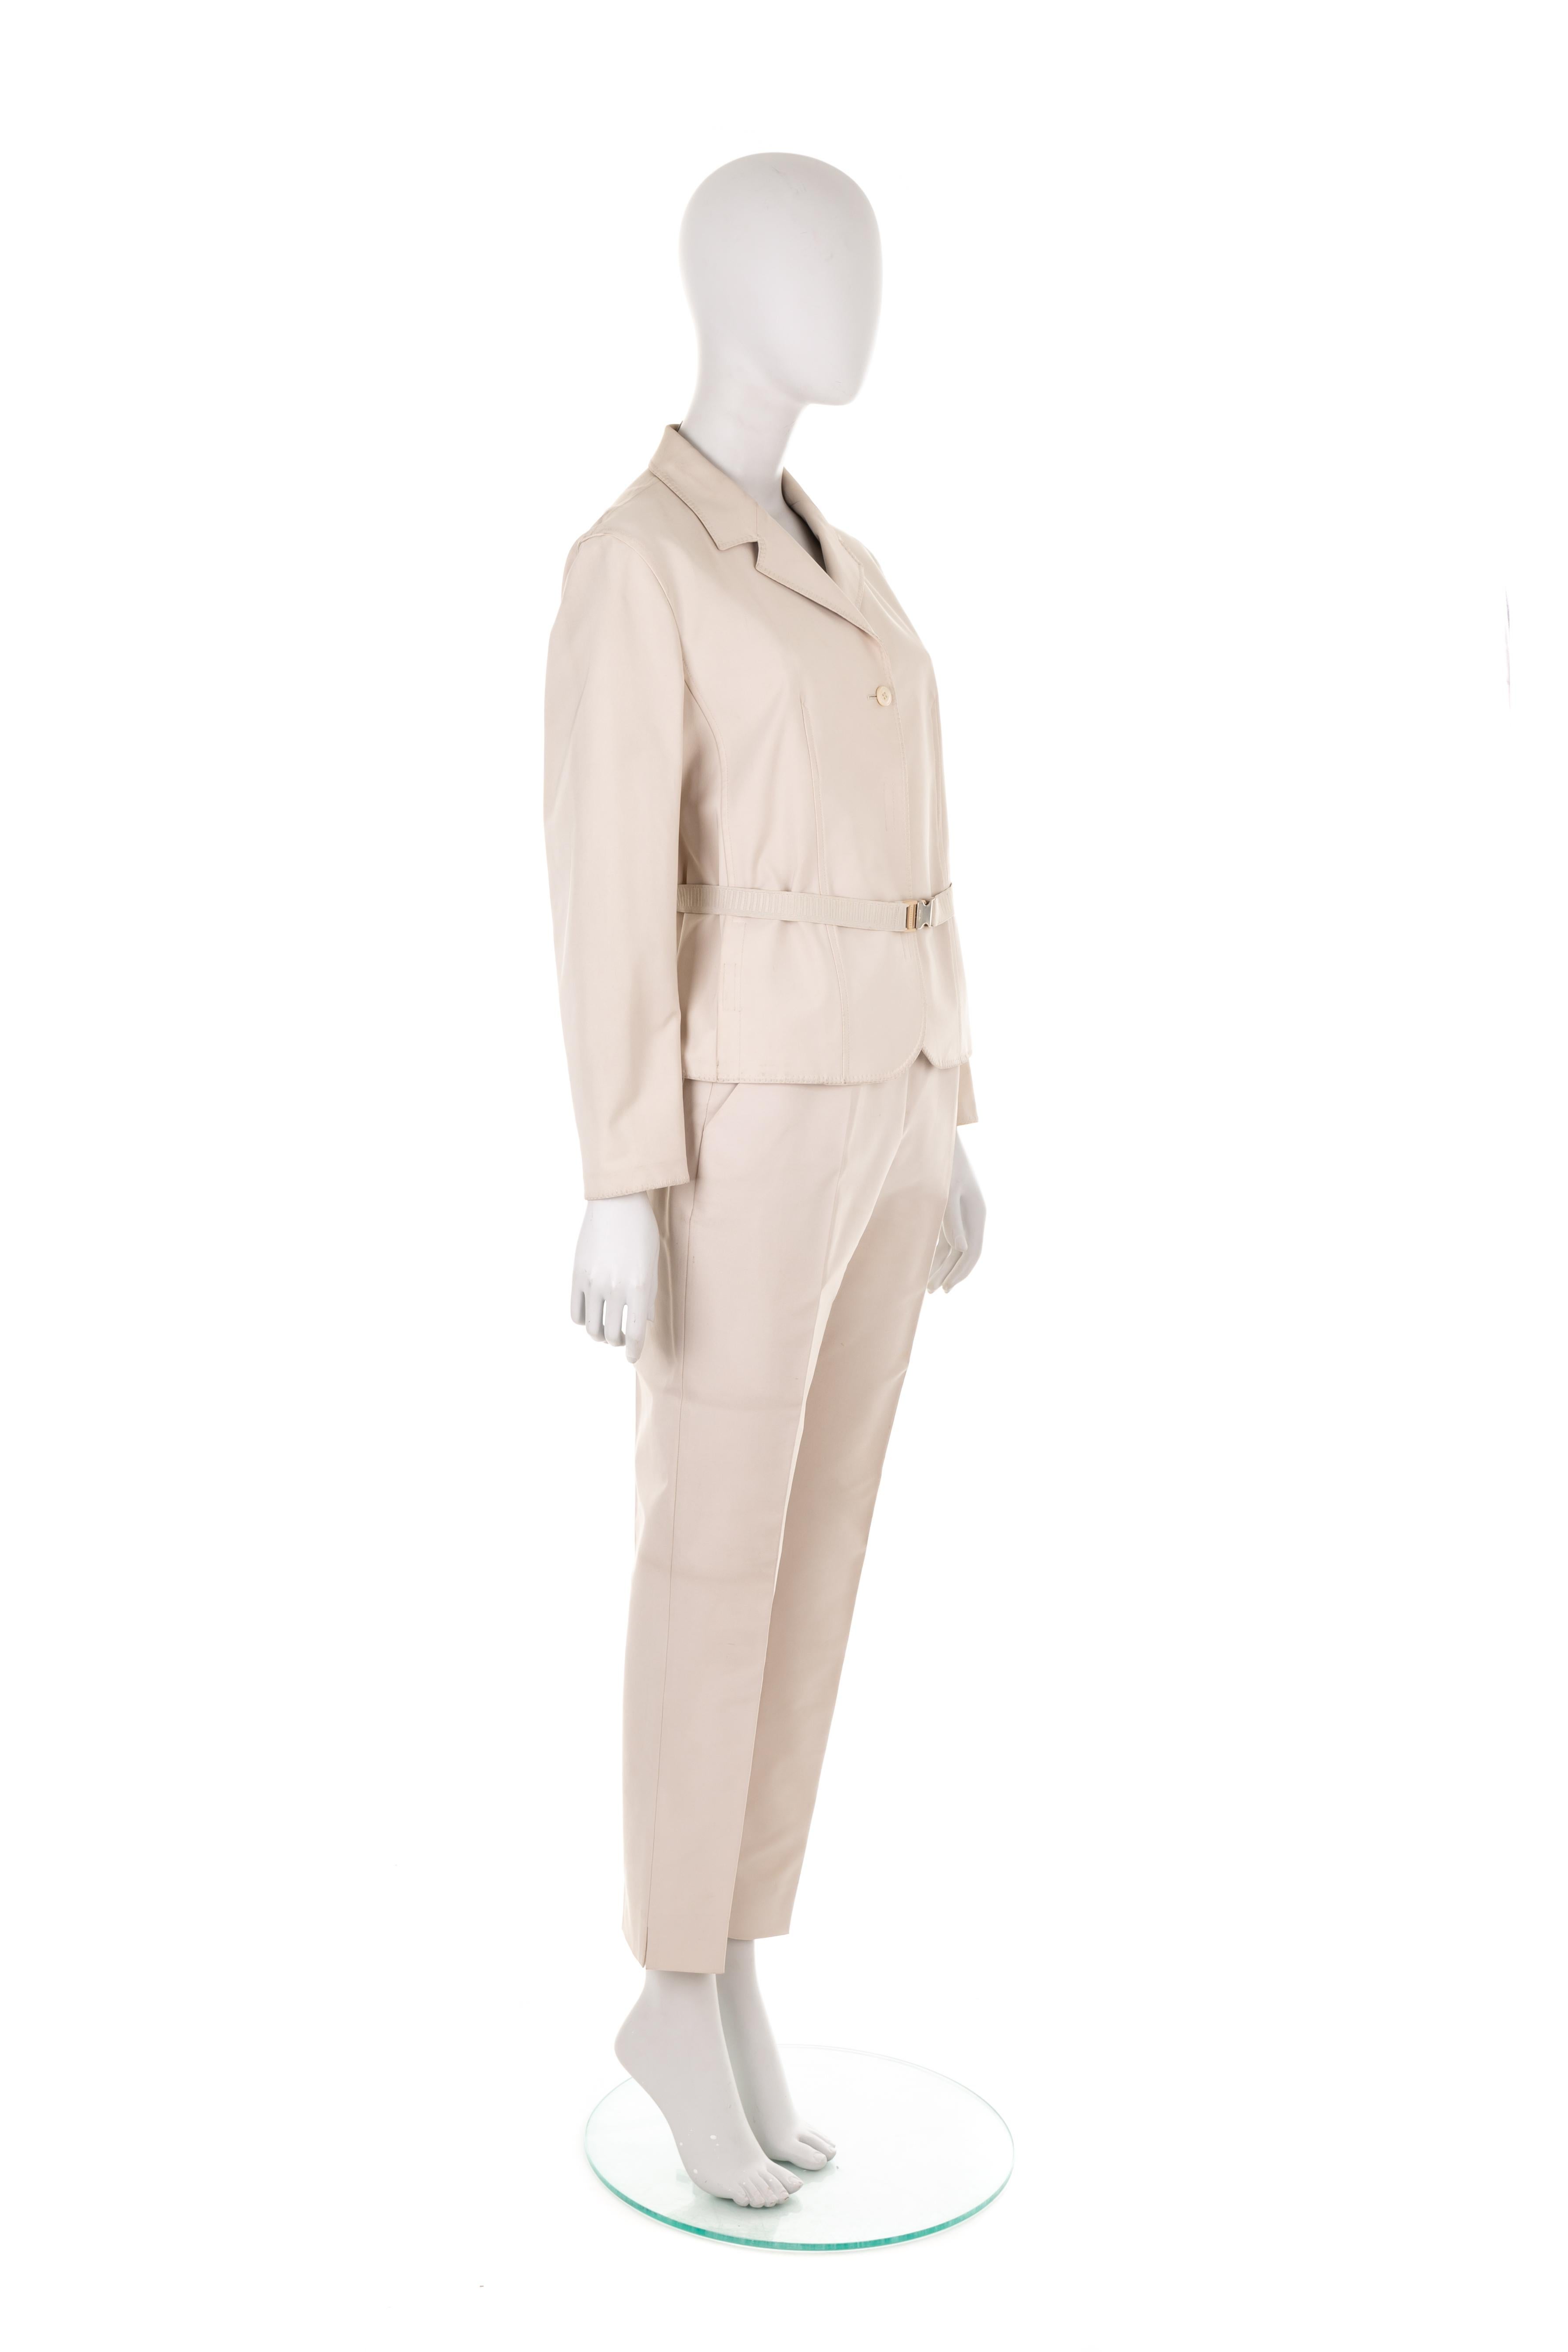 - Prada by Miuccia Prada
- Spring Summer 1998 collection
- Off-white nylon pant suit
- Structured blazer with velcro fastening
- Slim fit trousers
- Additional elastic waist-belt with logo buckle
- Size IT 44

JACKET
Shoulder to shoulder: 41 cm/